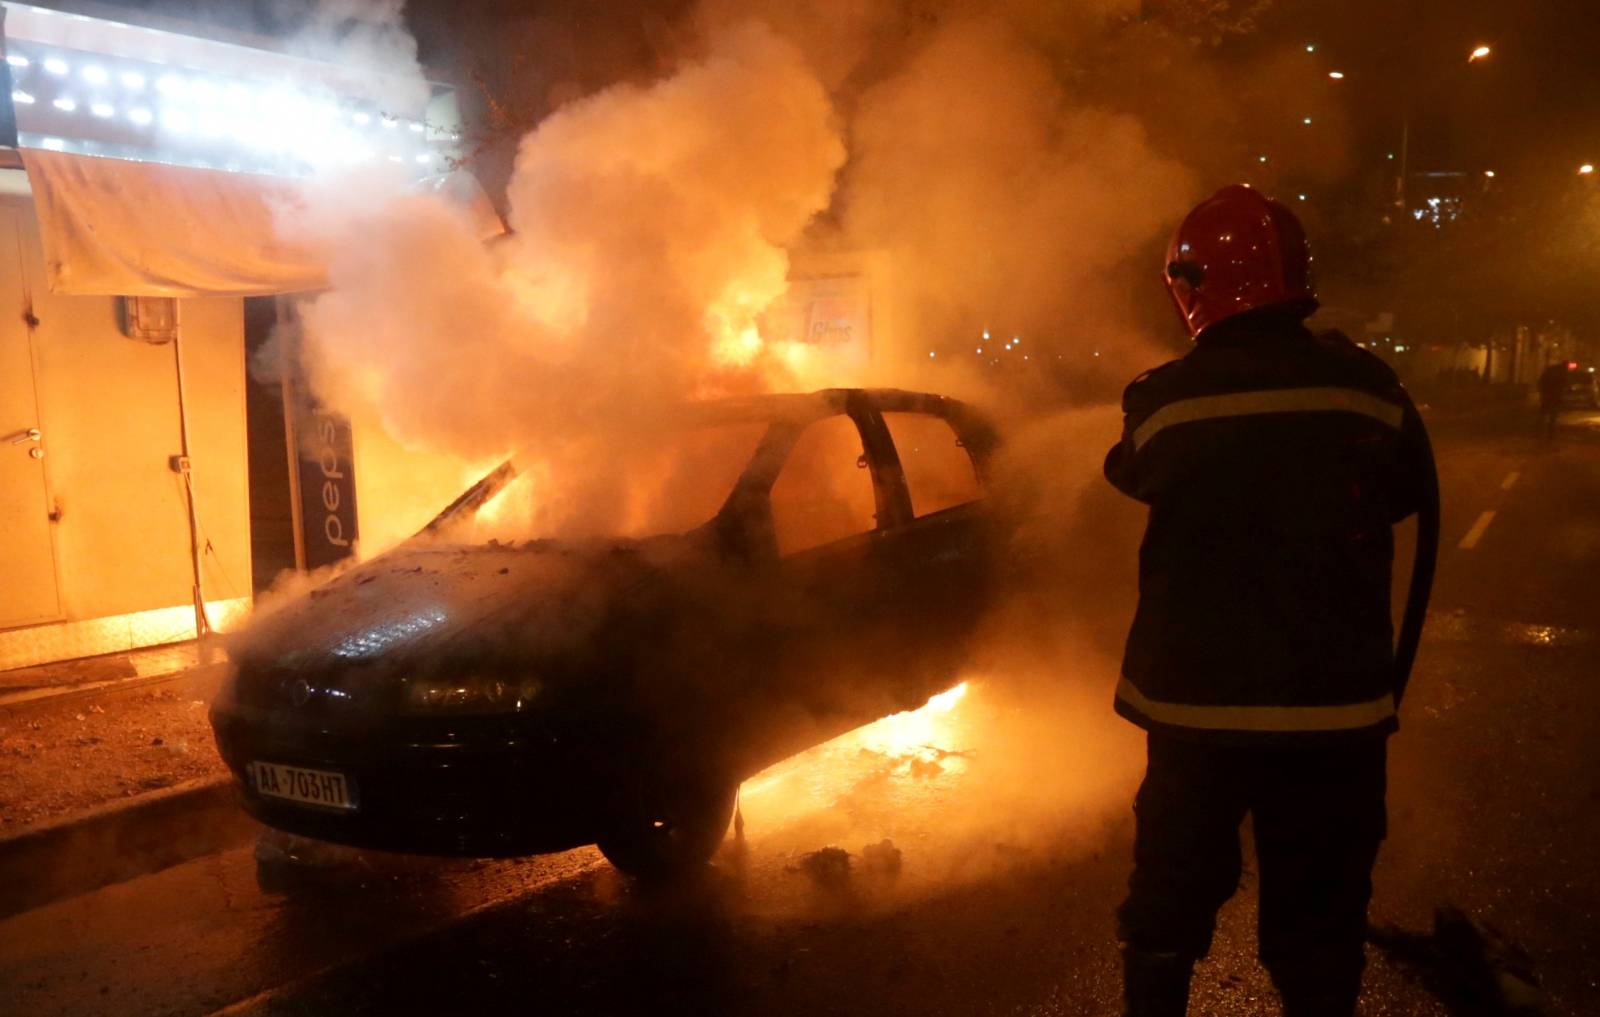 A firefighter extinguishes a burning car during an anti-government protest near the Parliament Building in Tirana